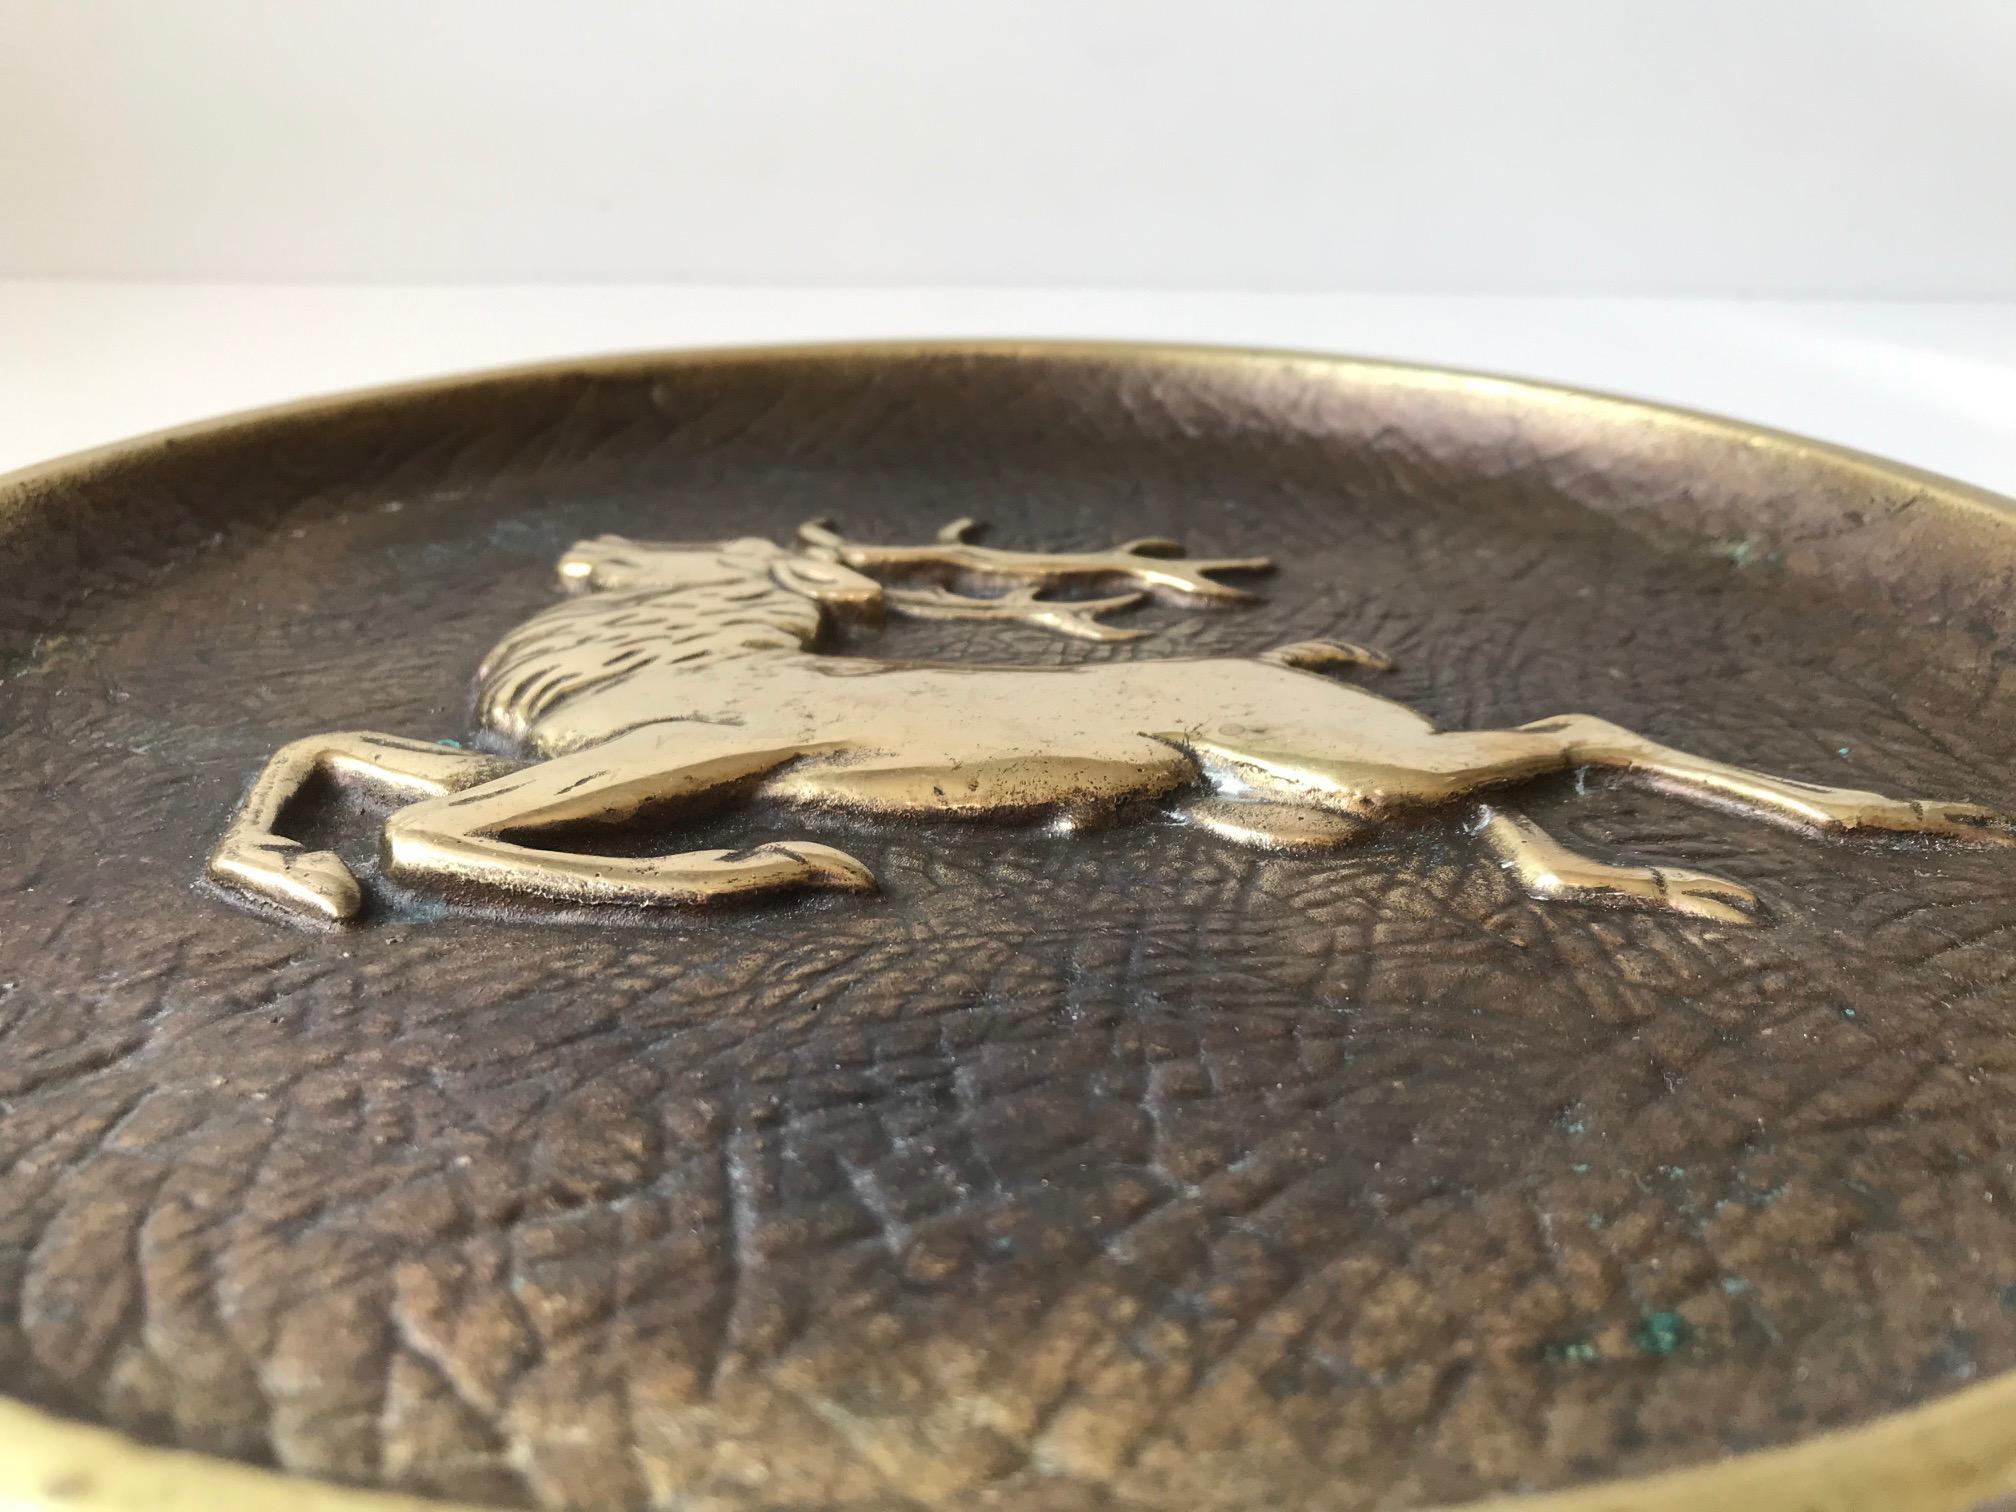 Heavy solid bronze bowl/dish with elephant skin texture and a center-motif of a stylized stag in relief. It was designed and manufactured by Crown in Copenhagen Denmark during the 1930s. The same period Just Andersen took the world by storm with his